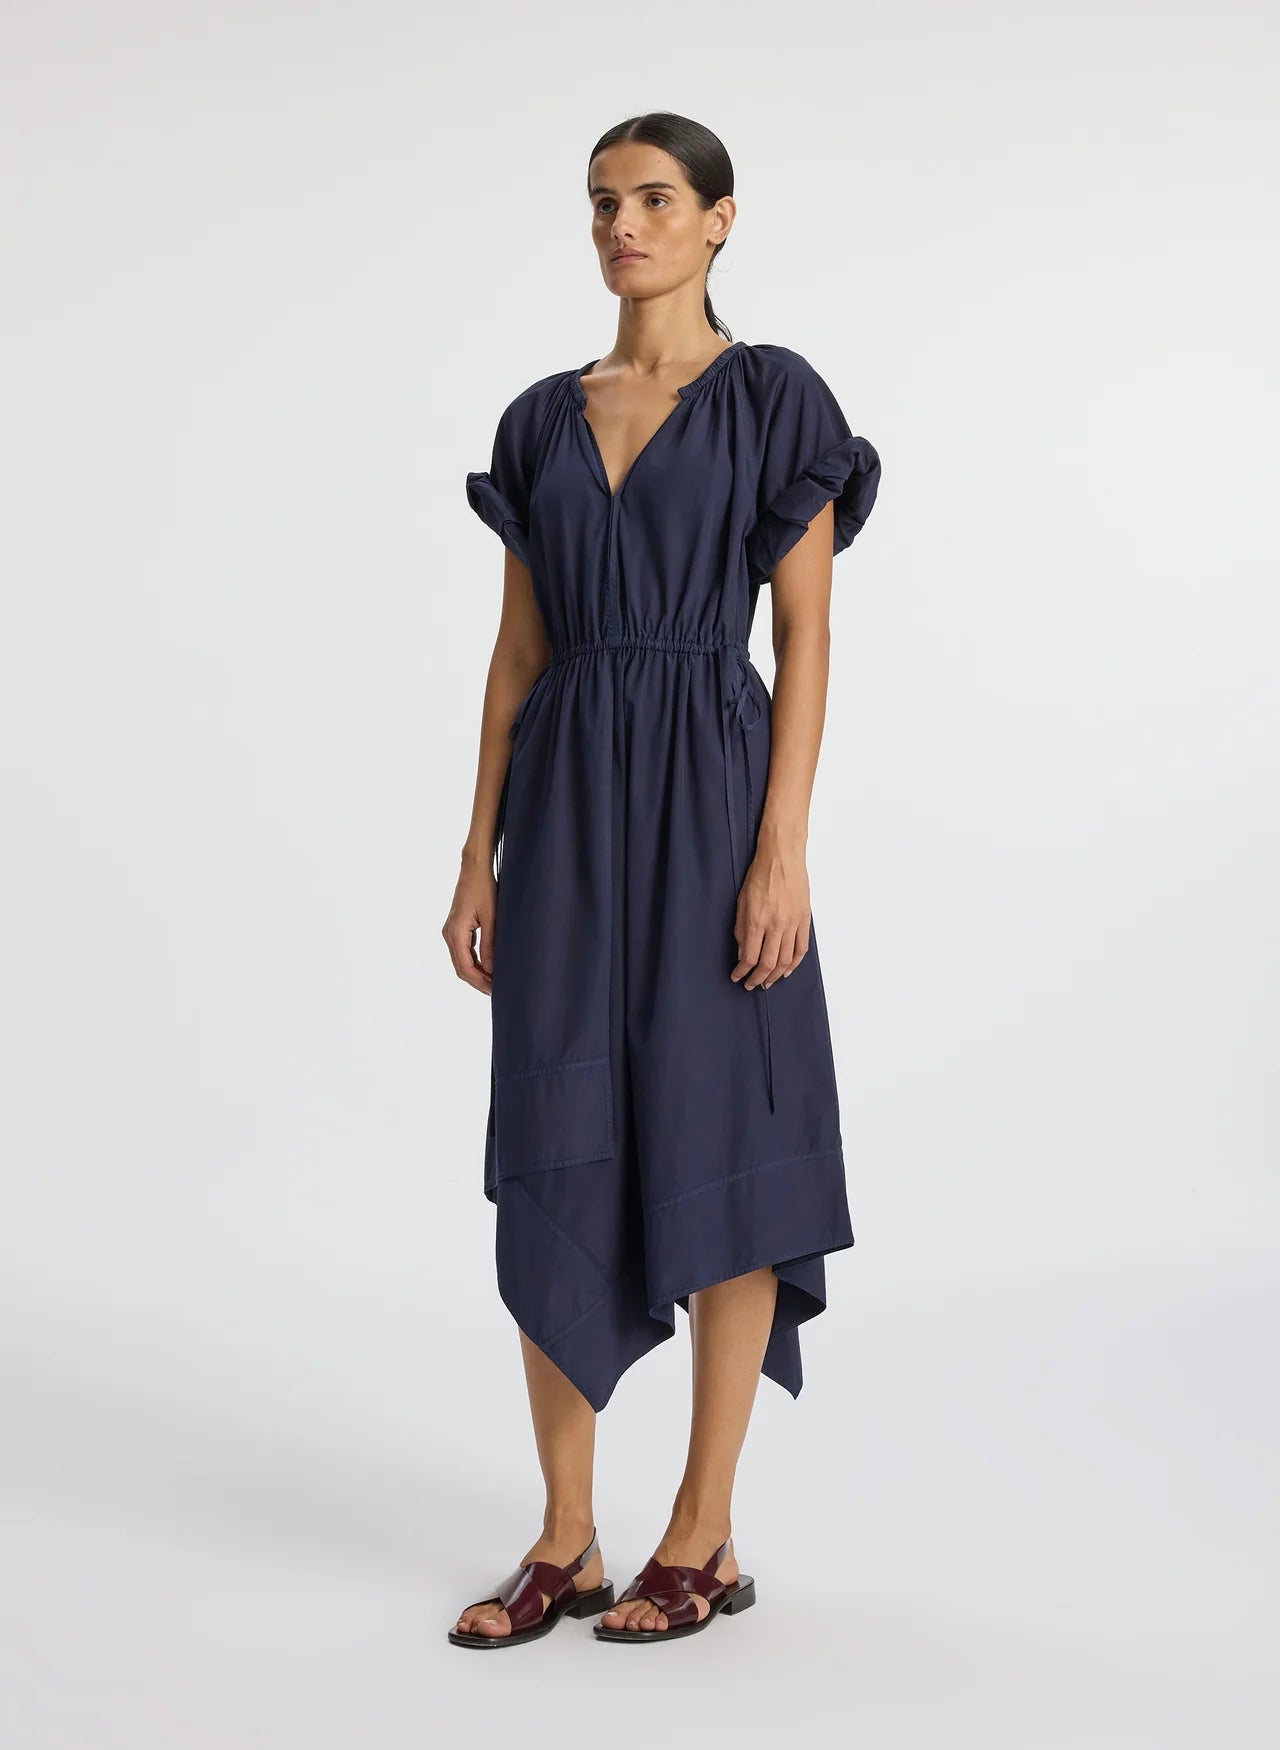 ODIN DRESS IN MARITIME NAVY - Romi Boutique